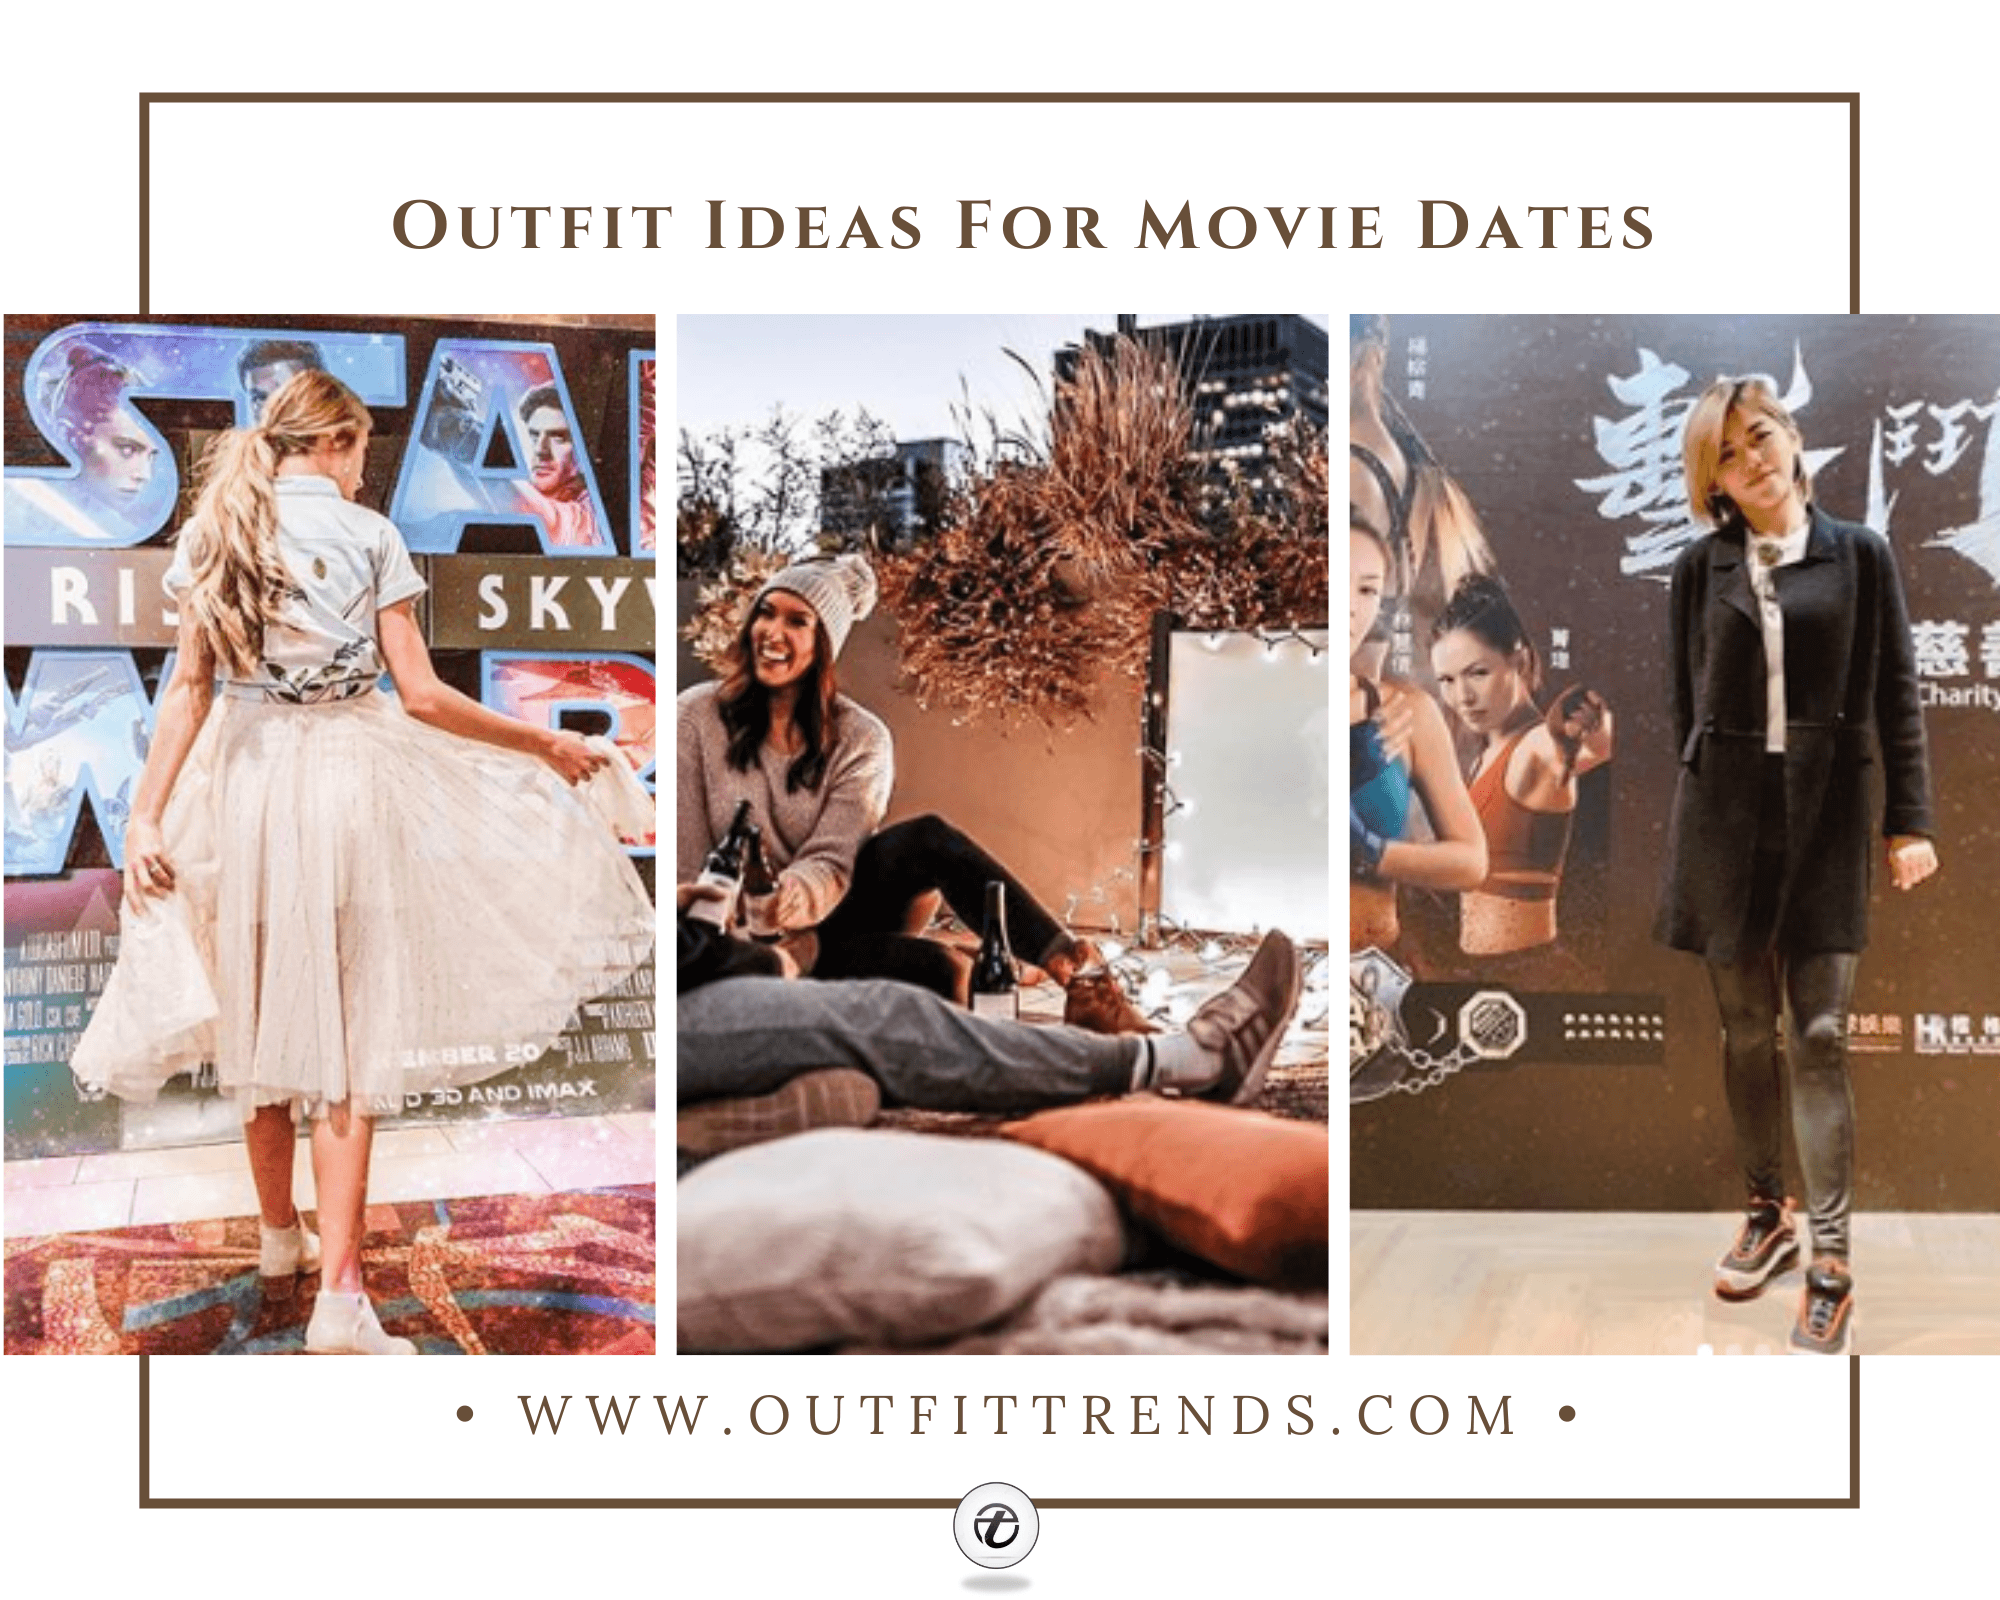 Movie Date Outfits – 21 Ideas on What to Wear to a Movie Date